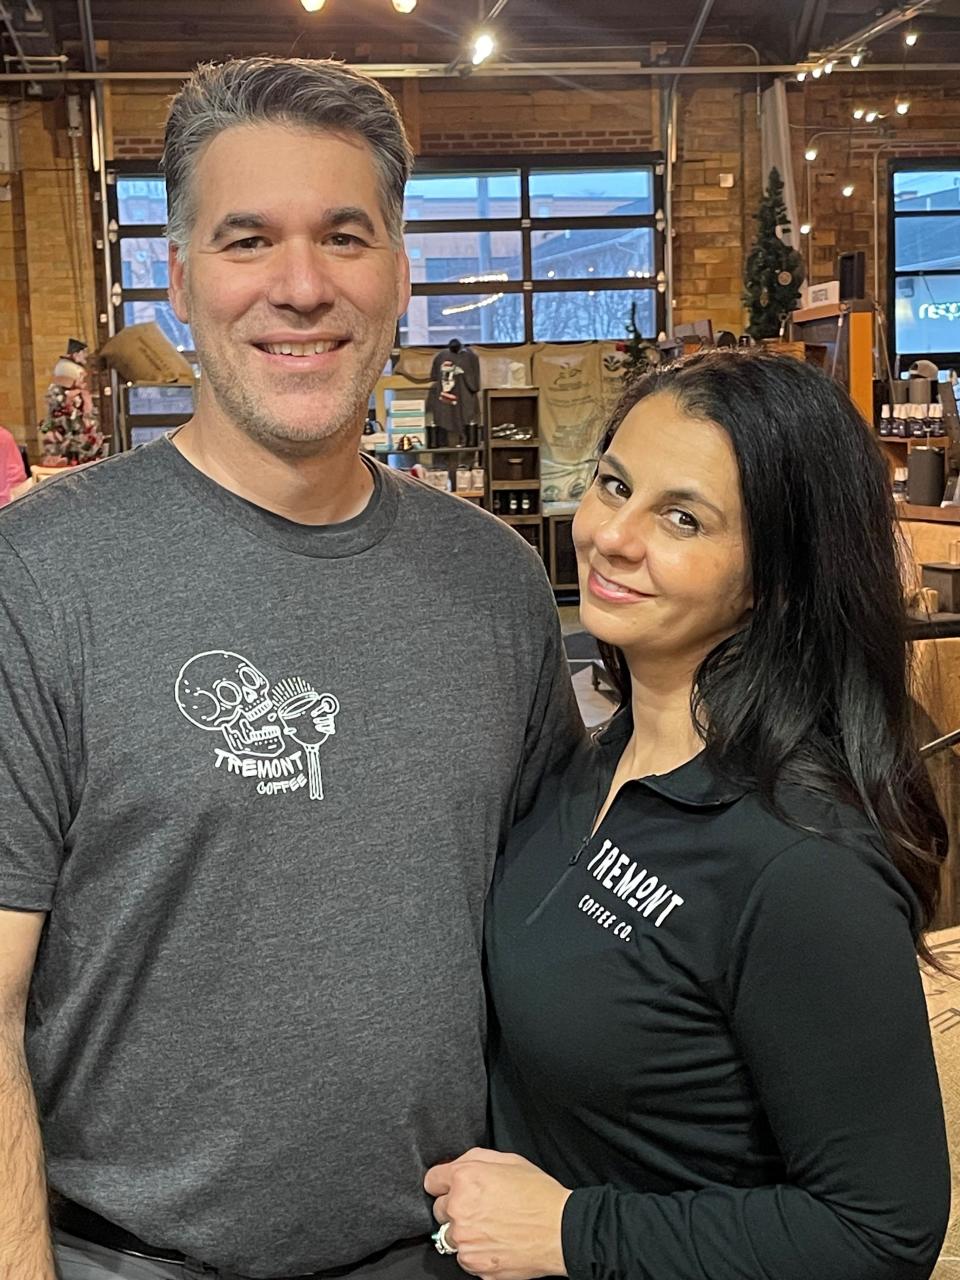 Mark and Michelle Kemp are founders and owners of Tremont Coffee Co., which has locations in Massillon, Perry Township and North Canton.